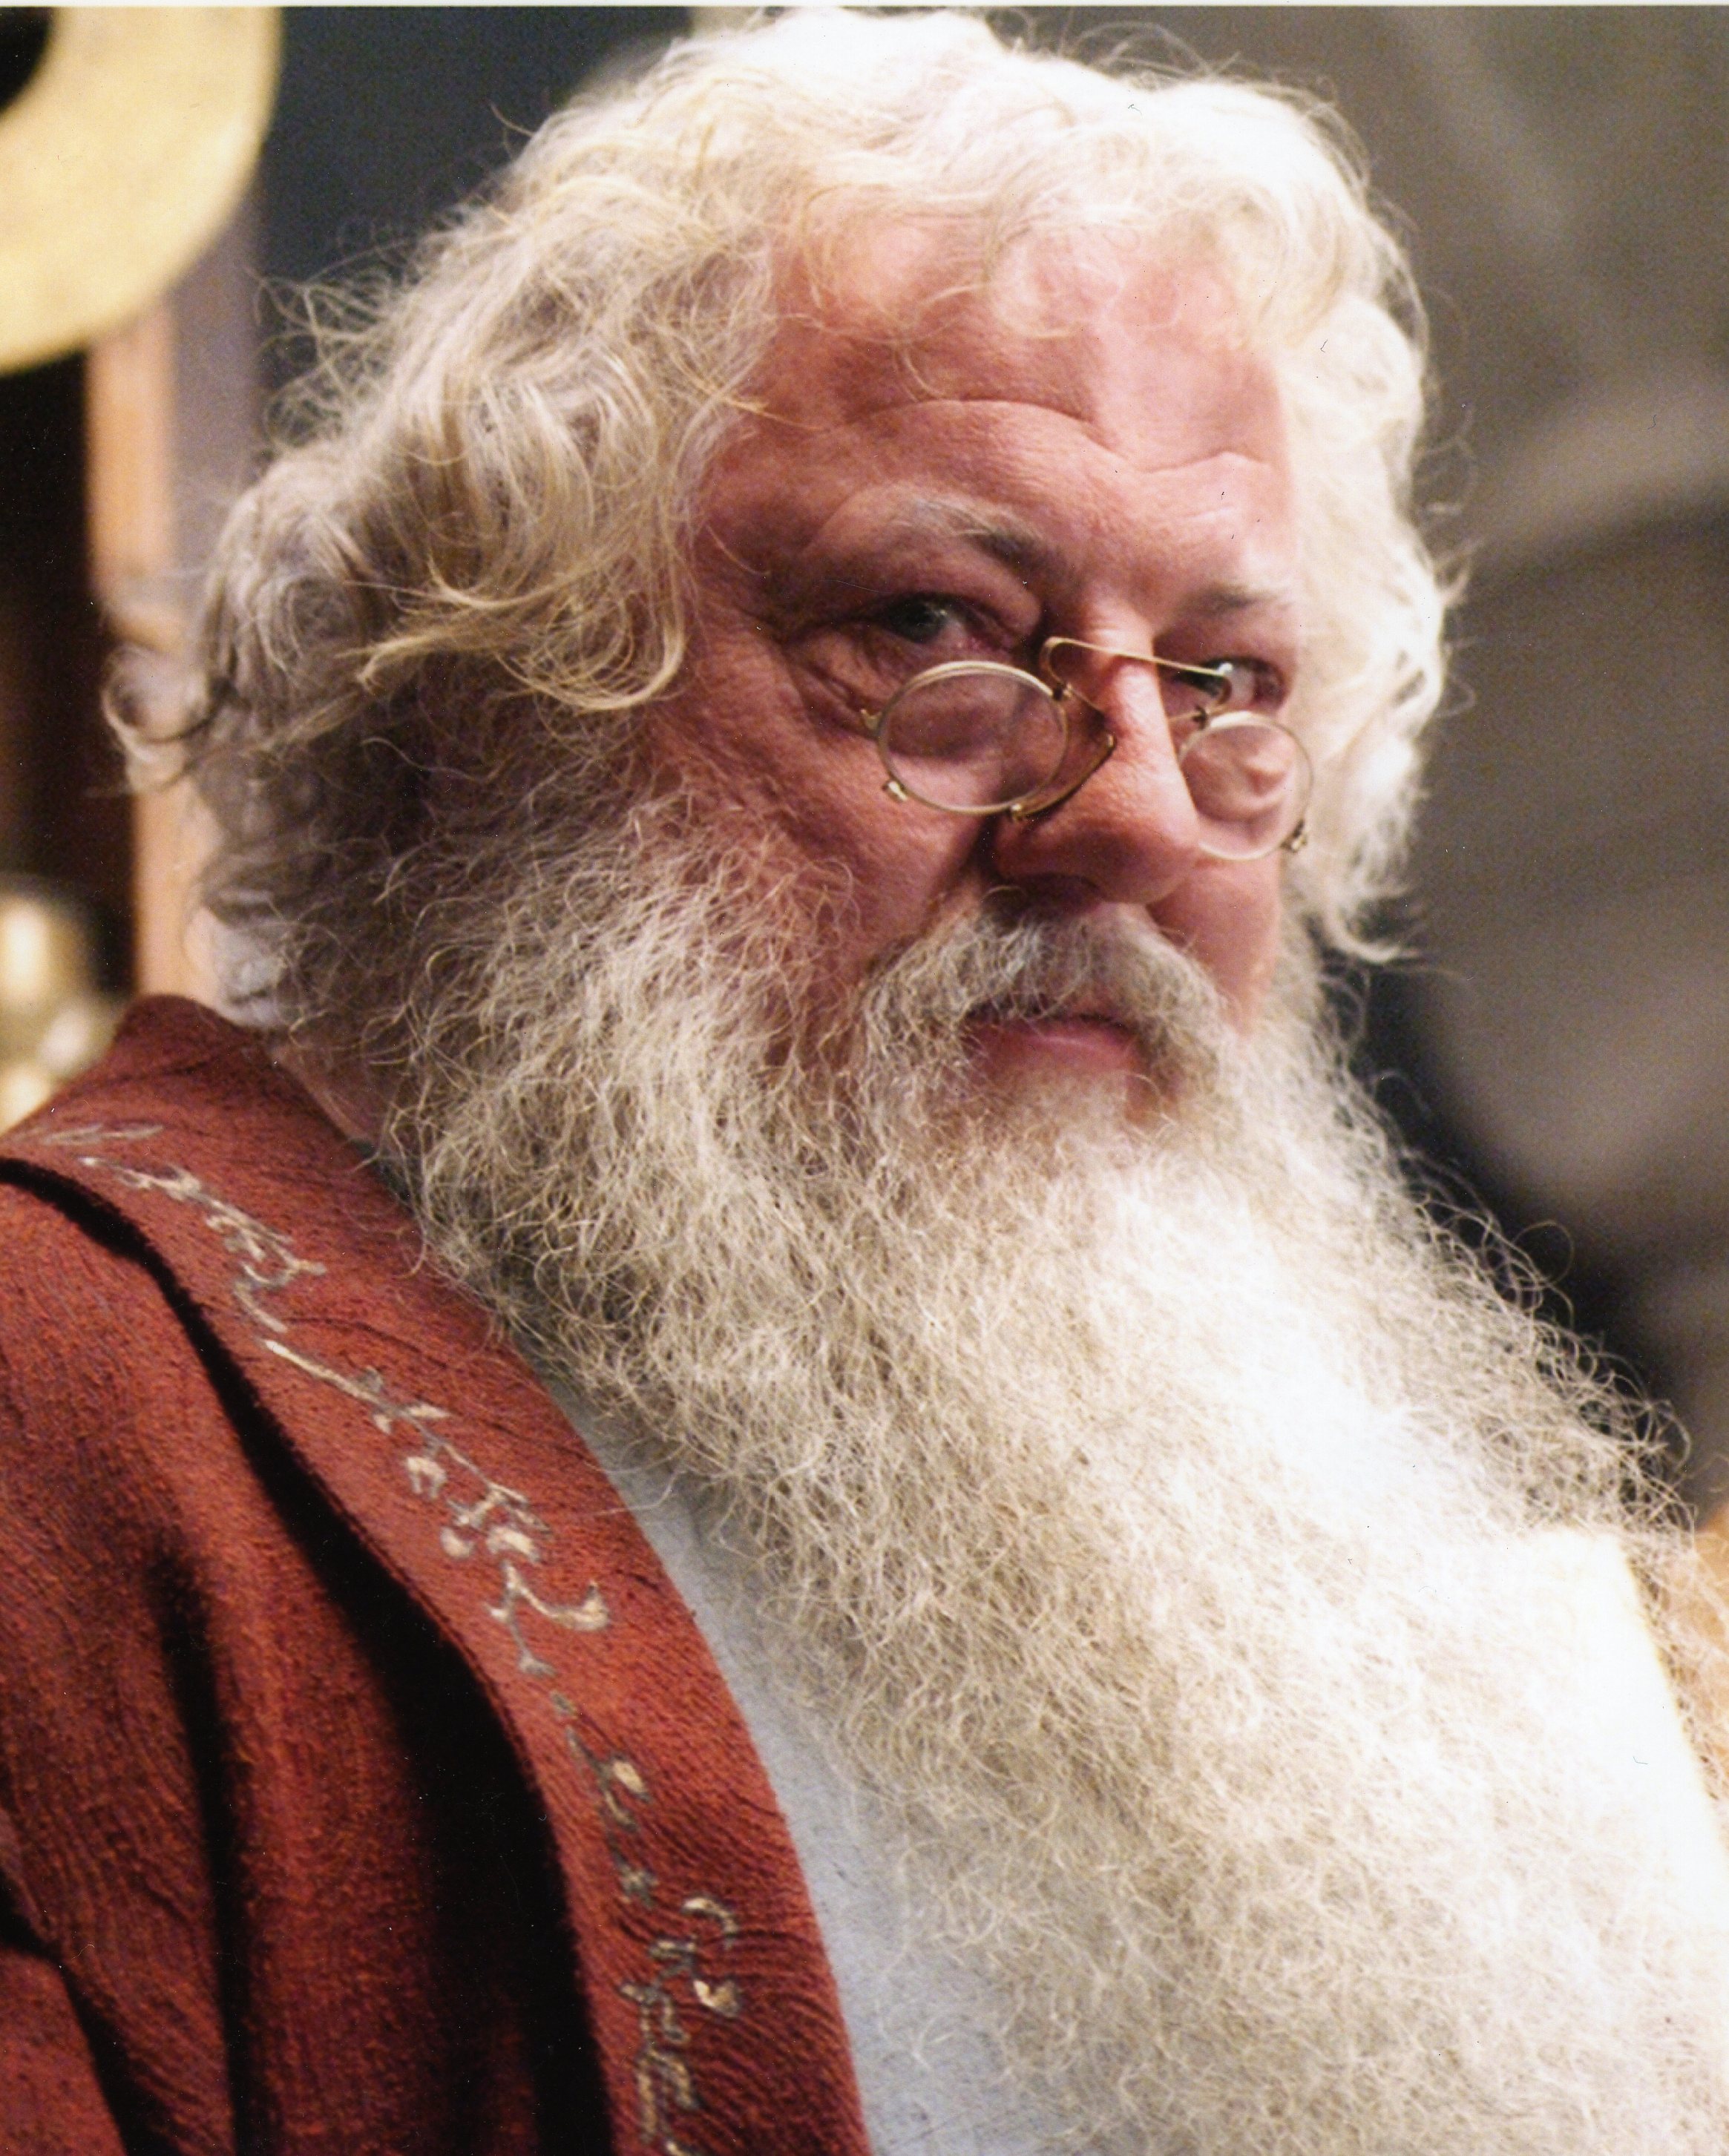 as Dr Cornelius in The Chronicles of Narnia/Prince Caspian